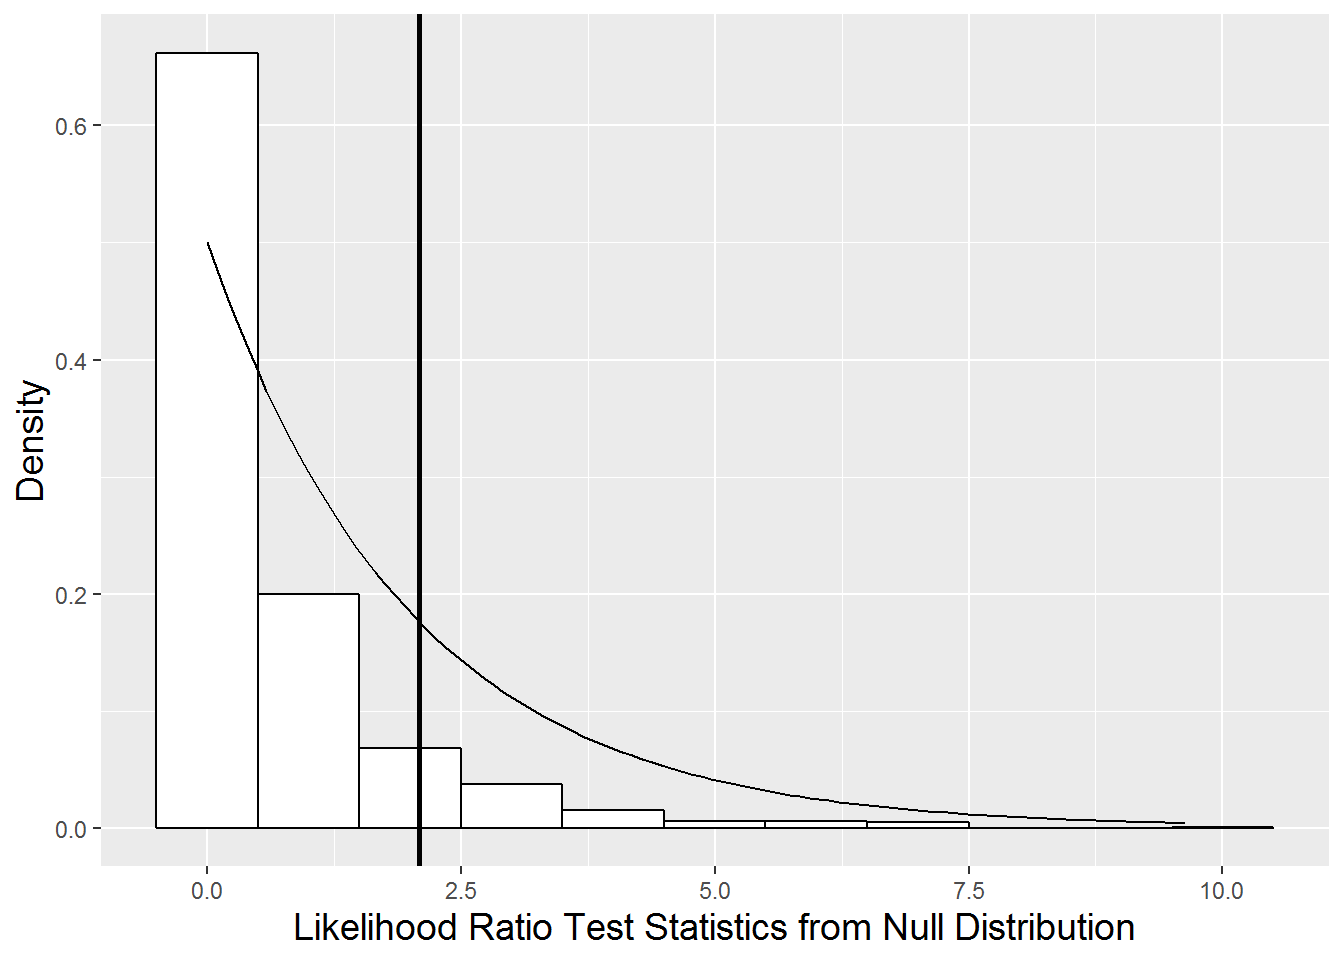 Null distribution of likelihood ratio test statistic derived using parametric bootstrap (histogram) compared to a chi-square distribution with 2 degrees of freedom (smooth curve).  The horizontal line represents the observed likelihood ratio test statistic.